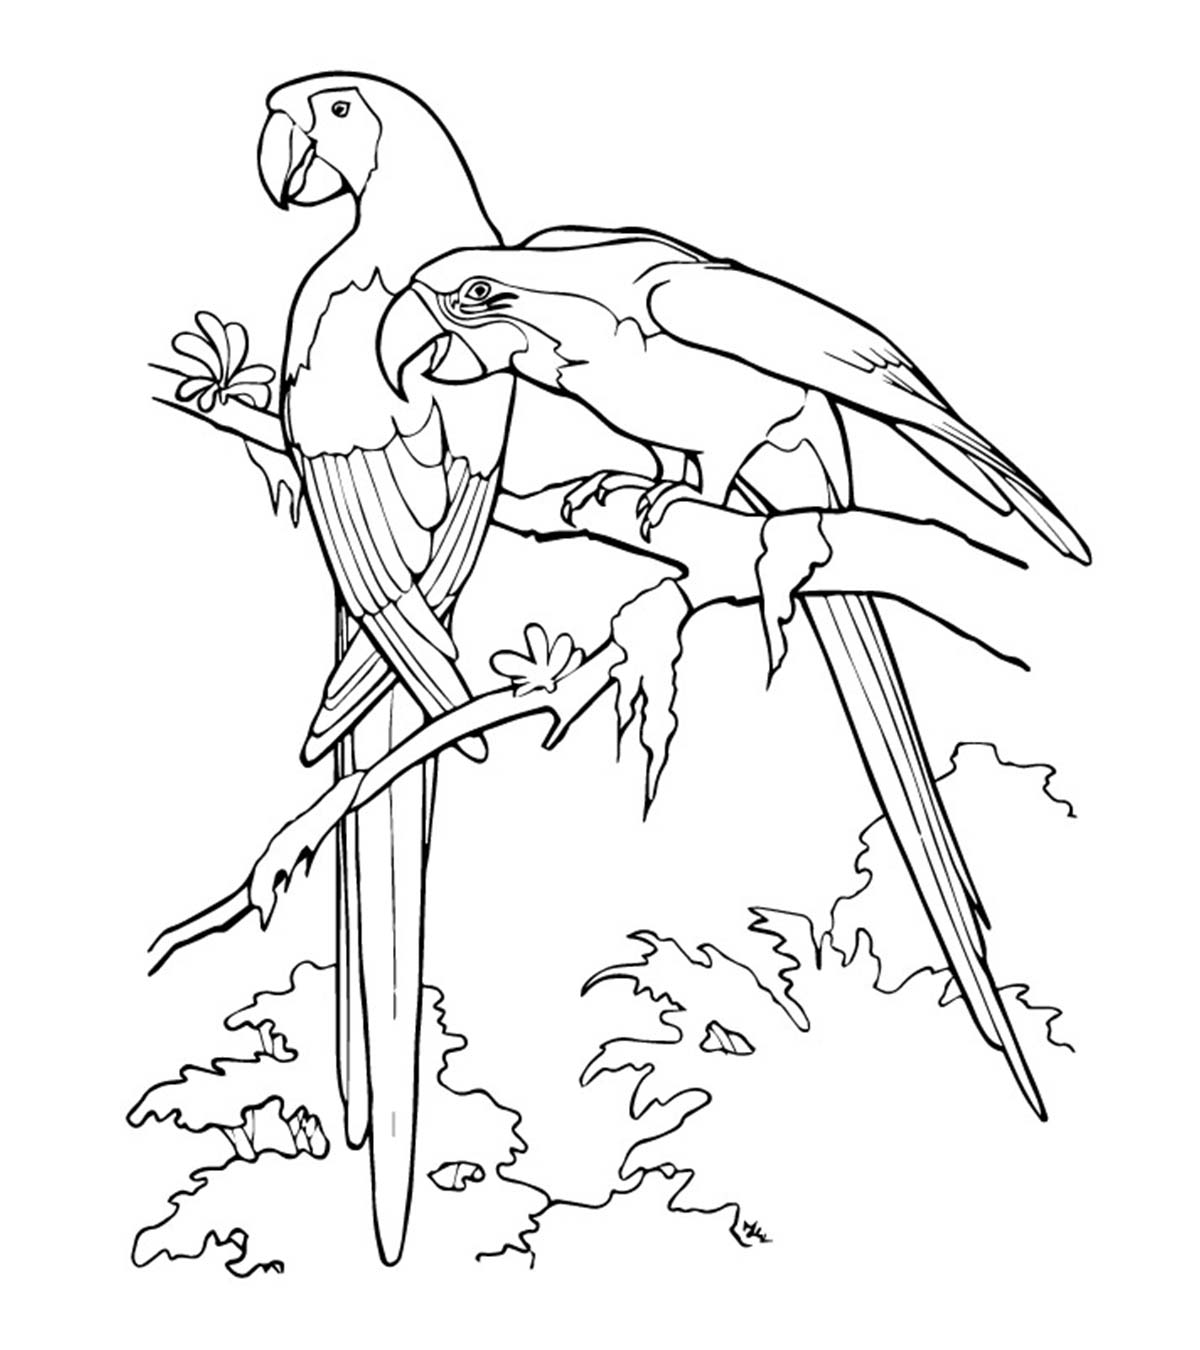 25 Cute Parrot Coloring Pages Your Toddler Will Love To Color_image